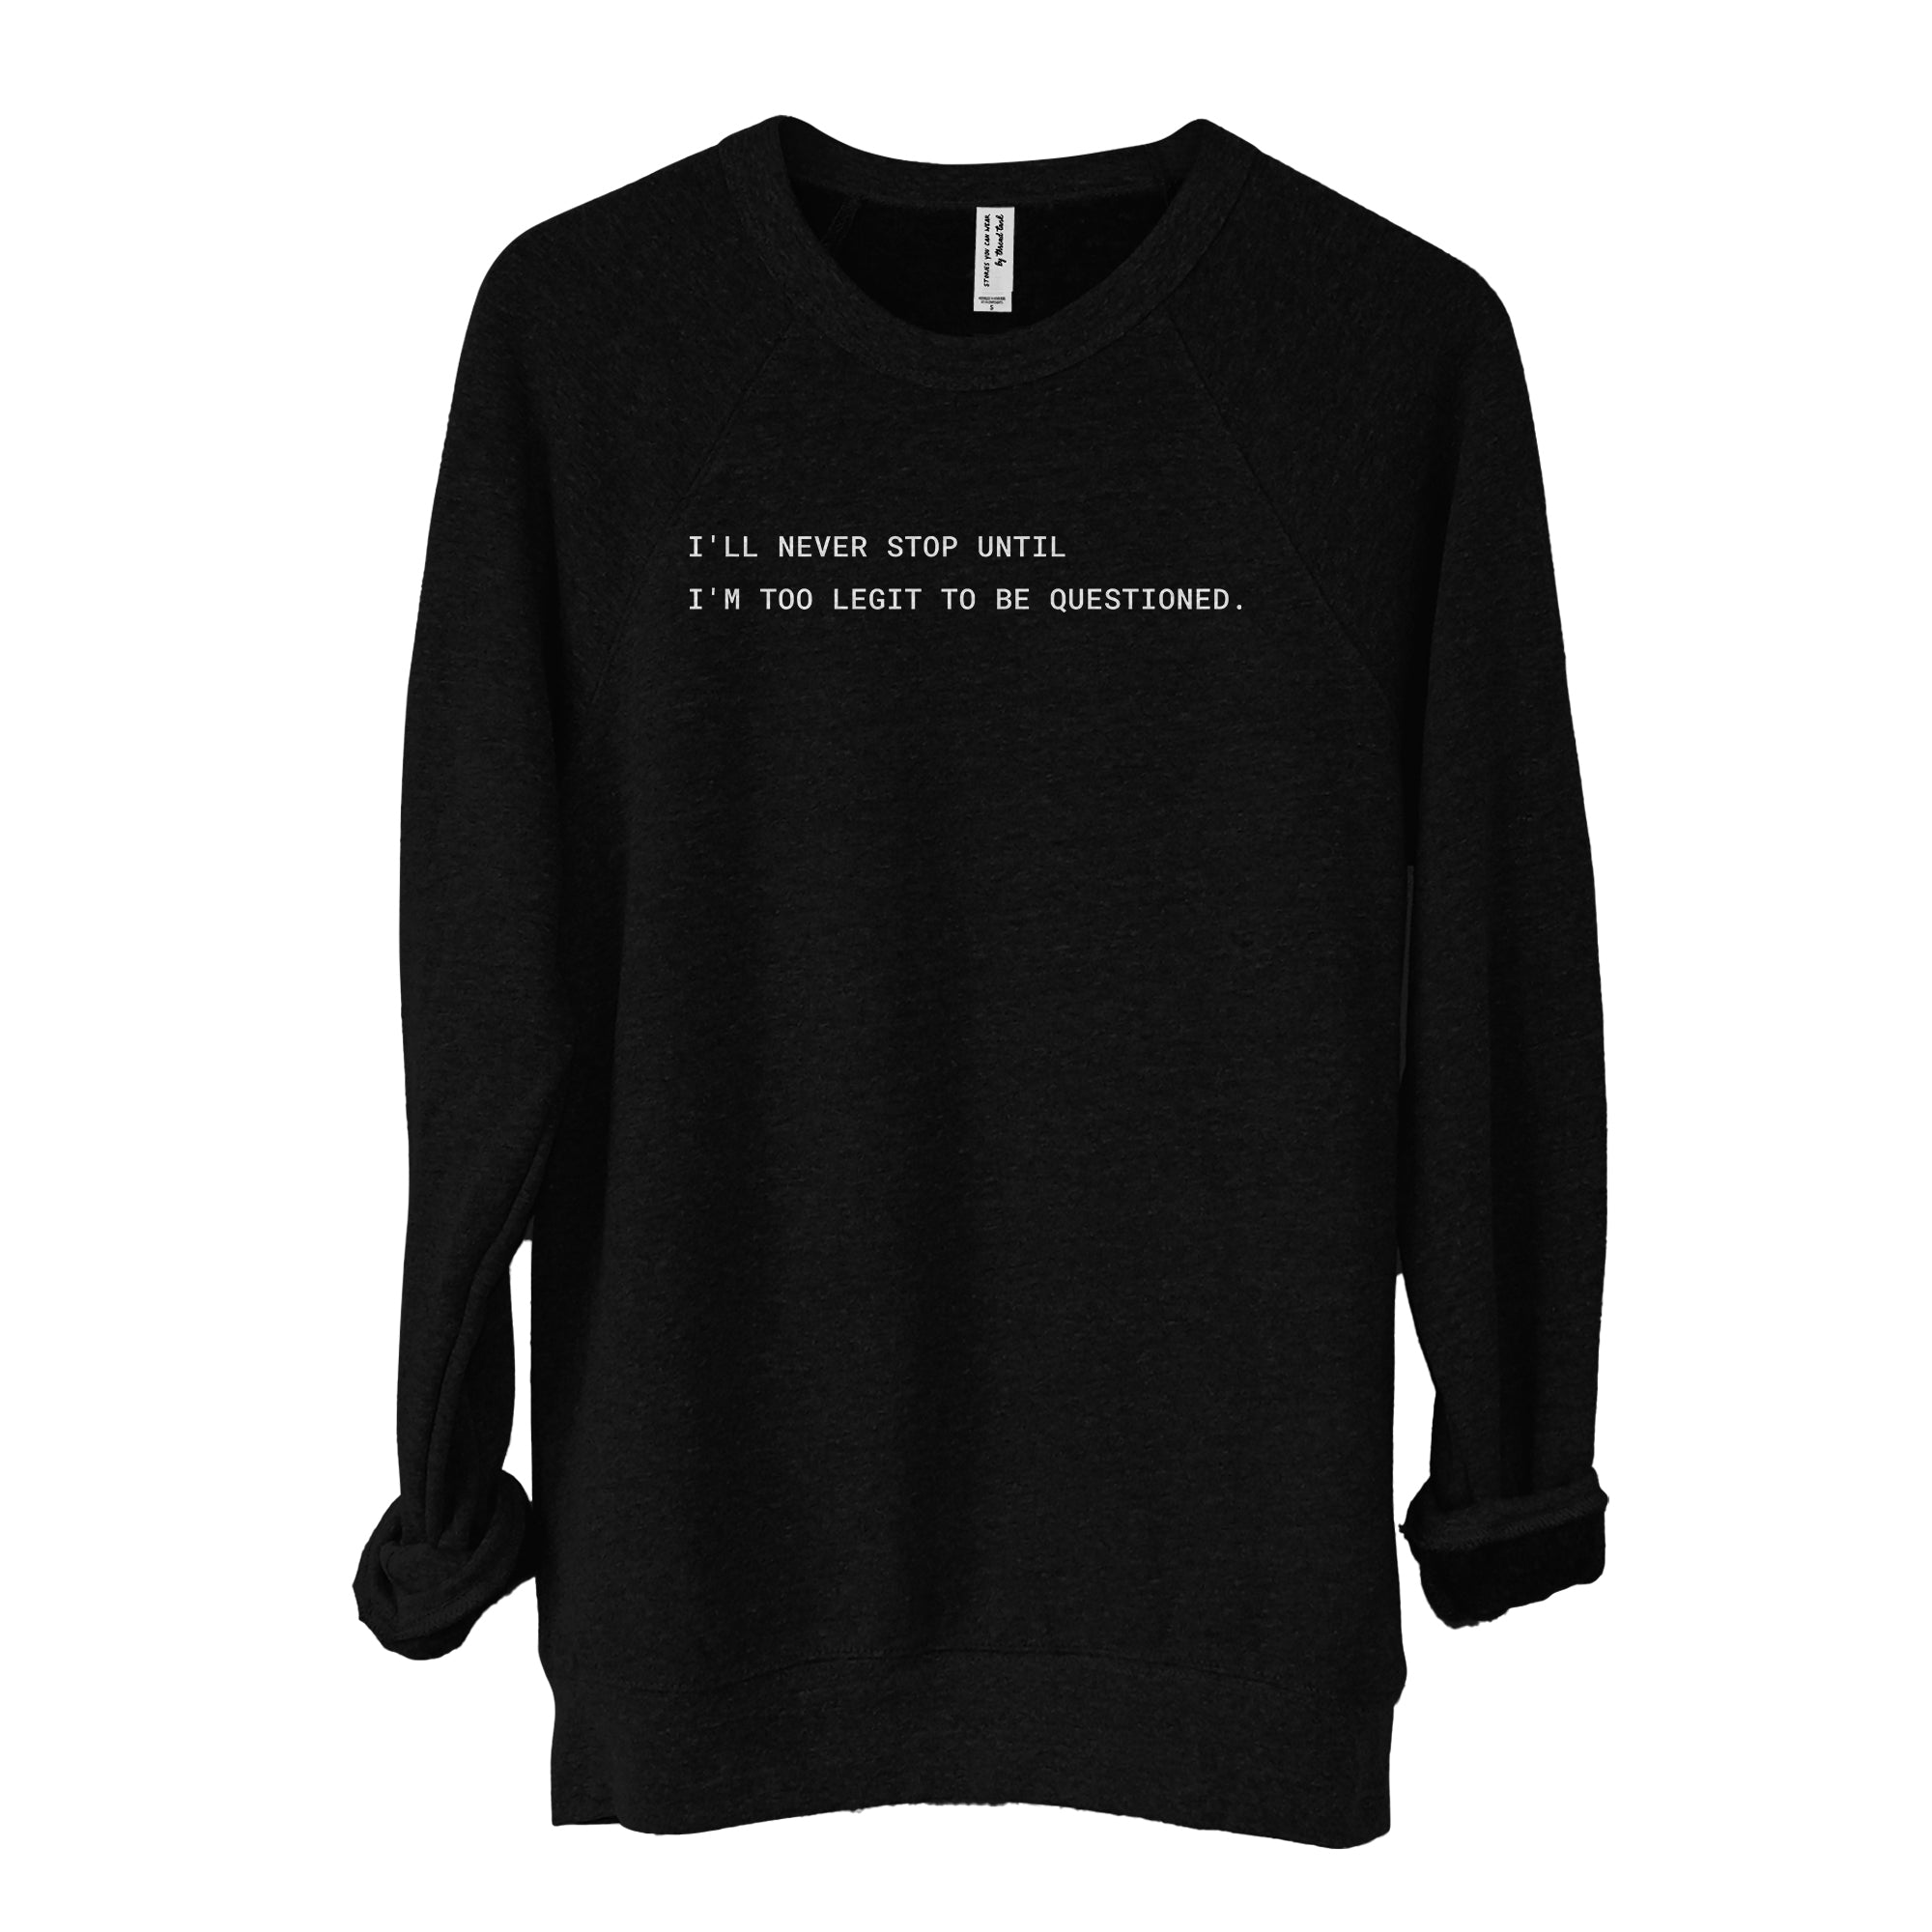 I'm Too Legit to Be Questioned Fleece Sweater